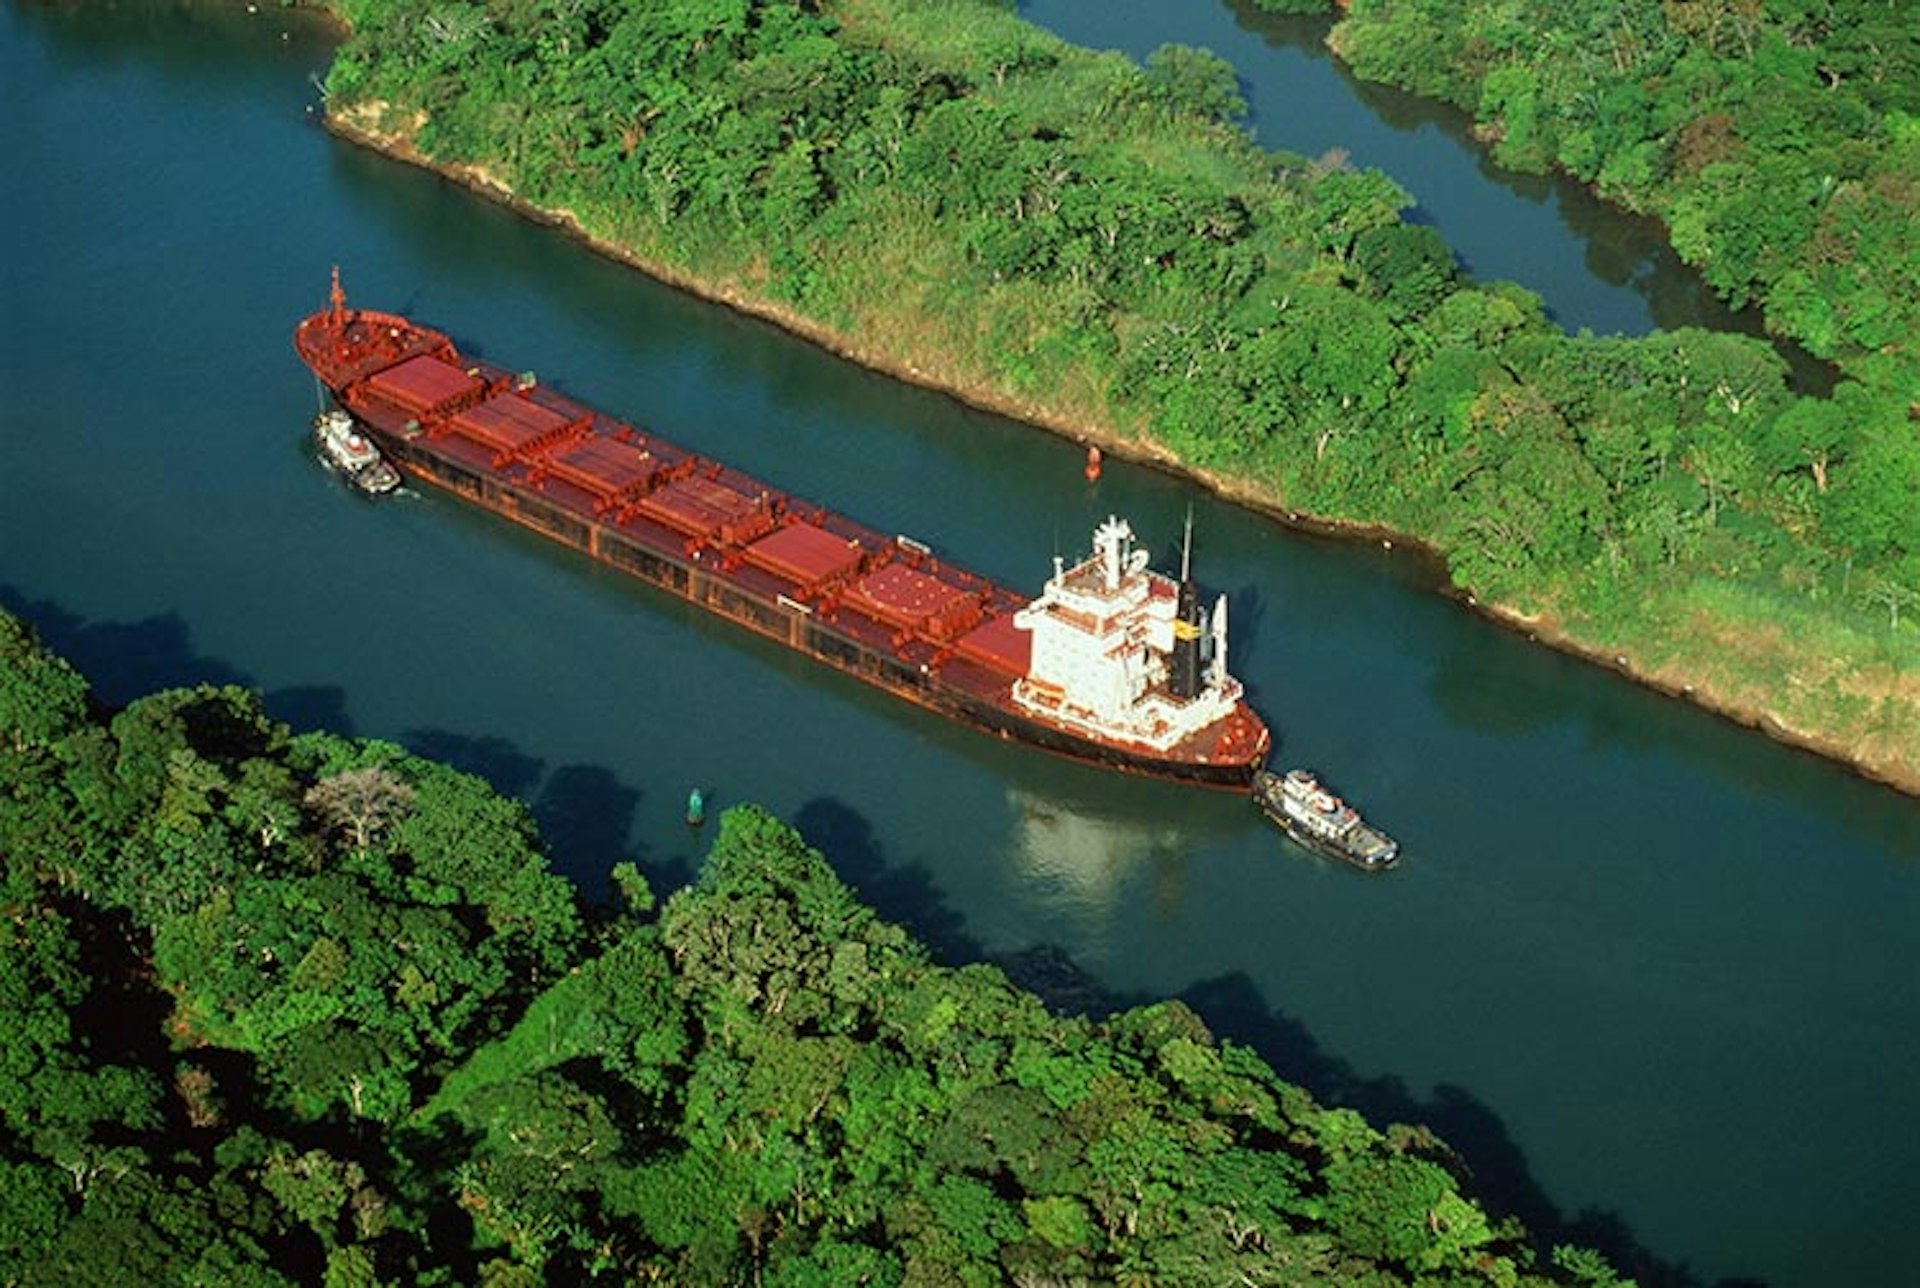 No need to stow away among the barrels, you can legitimately see the Panama Canal by cargo freighter. Image by Will & Deni McIntyre / The Image Bank / Getty Images